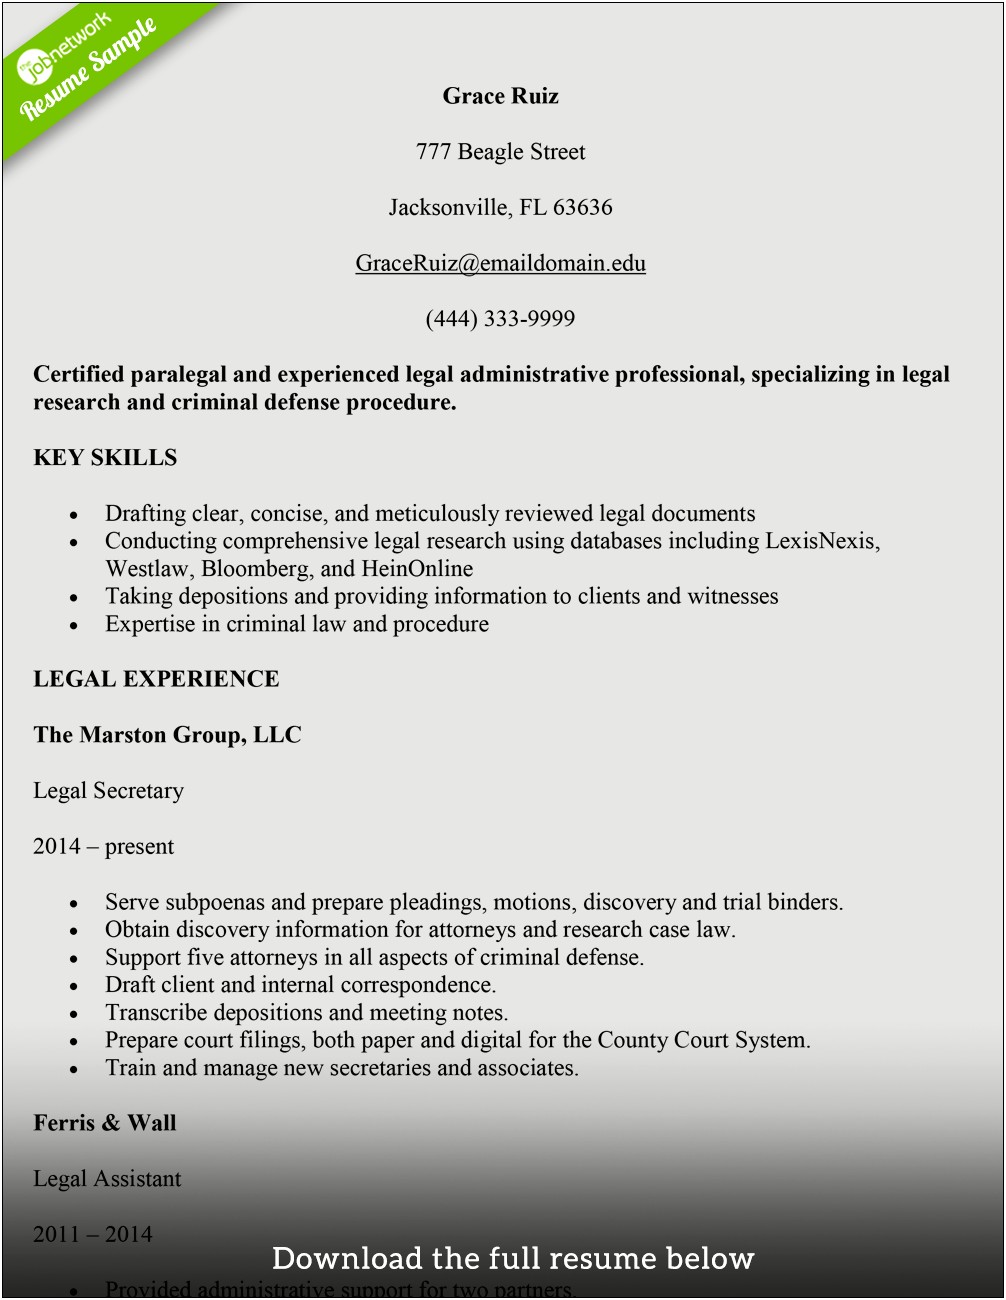 Solo Law Practice Work Experience Resume